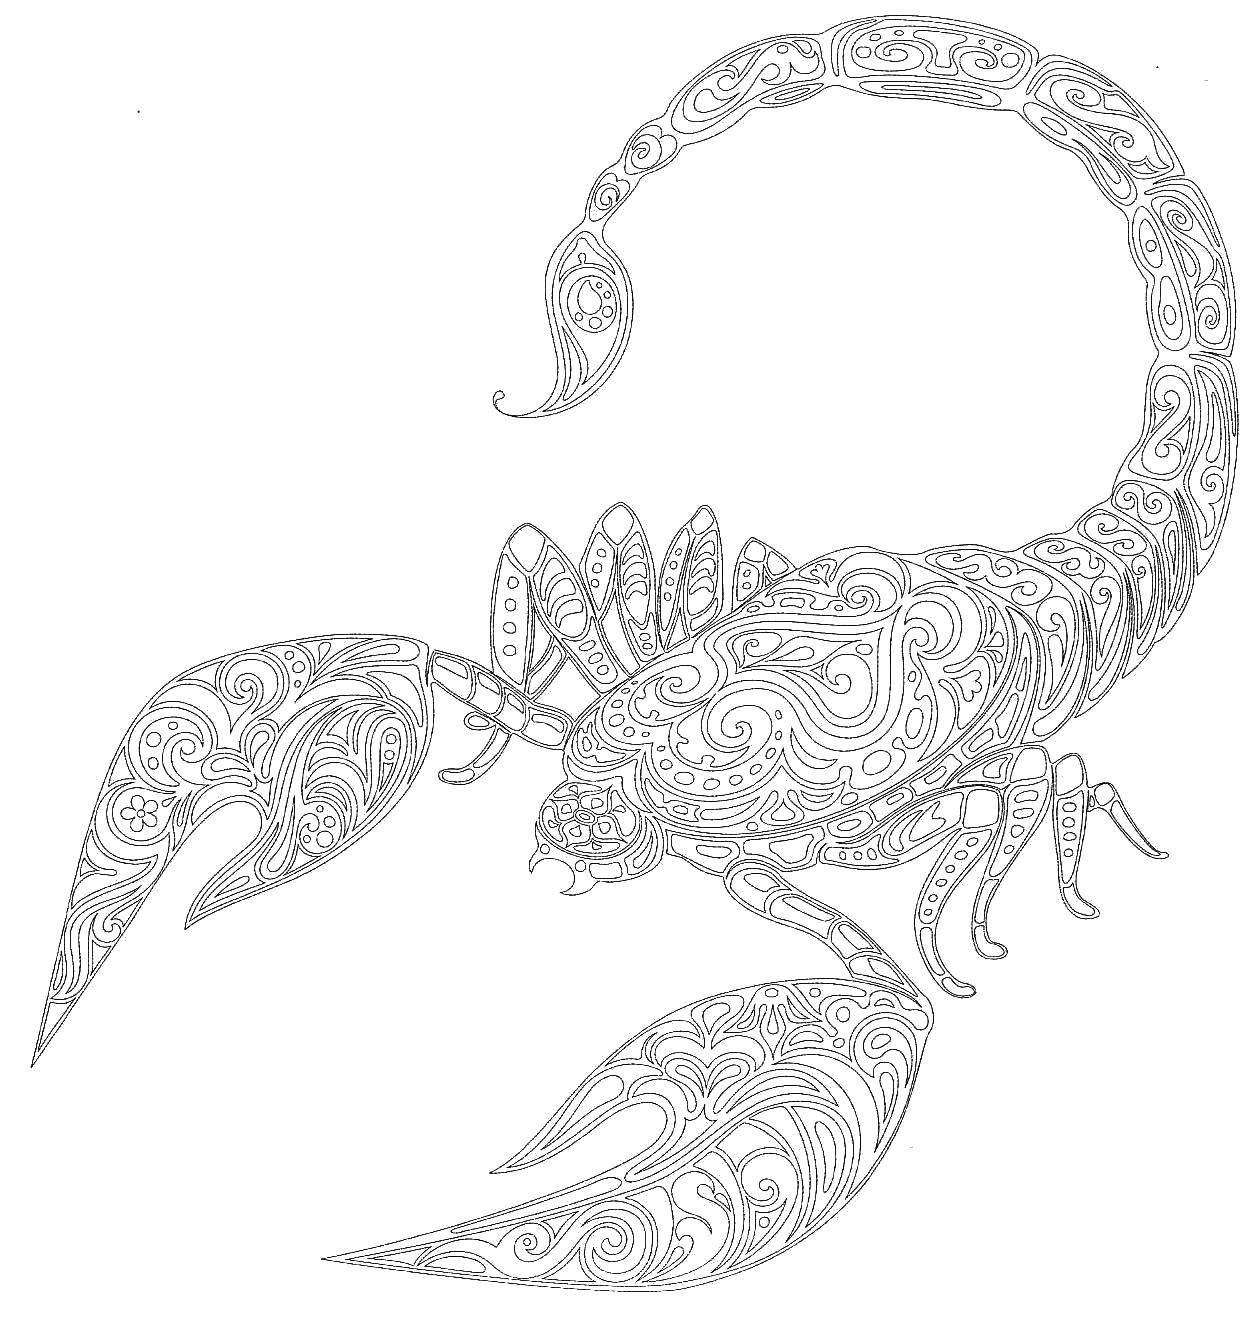 Coloring Patterned Scorpio. Category patterns. Tags:  Patterns, animals.